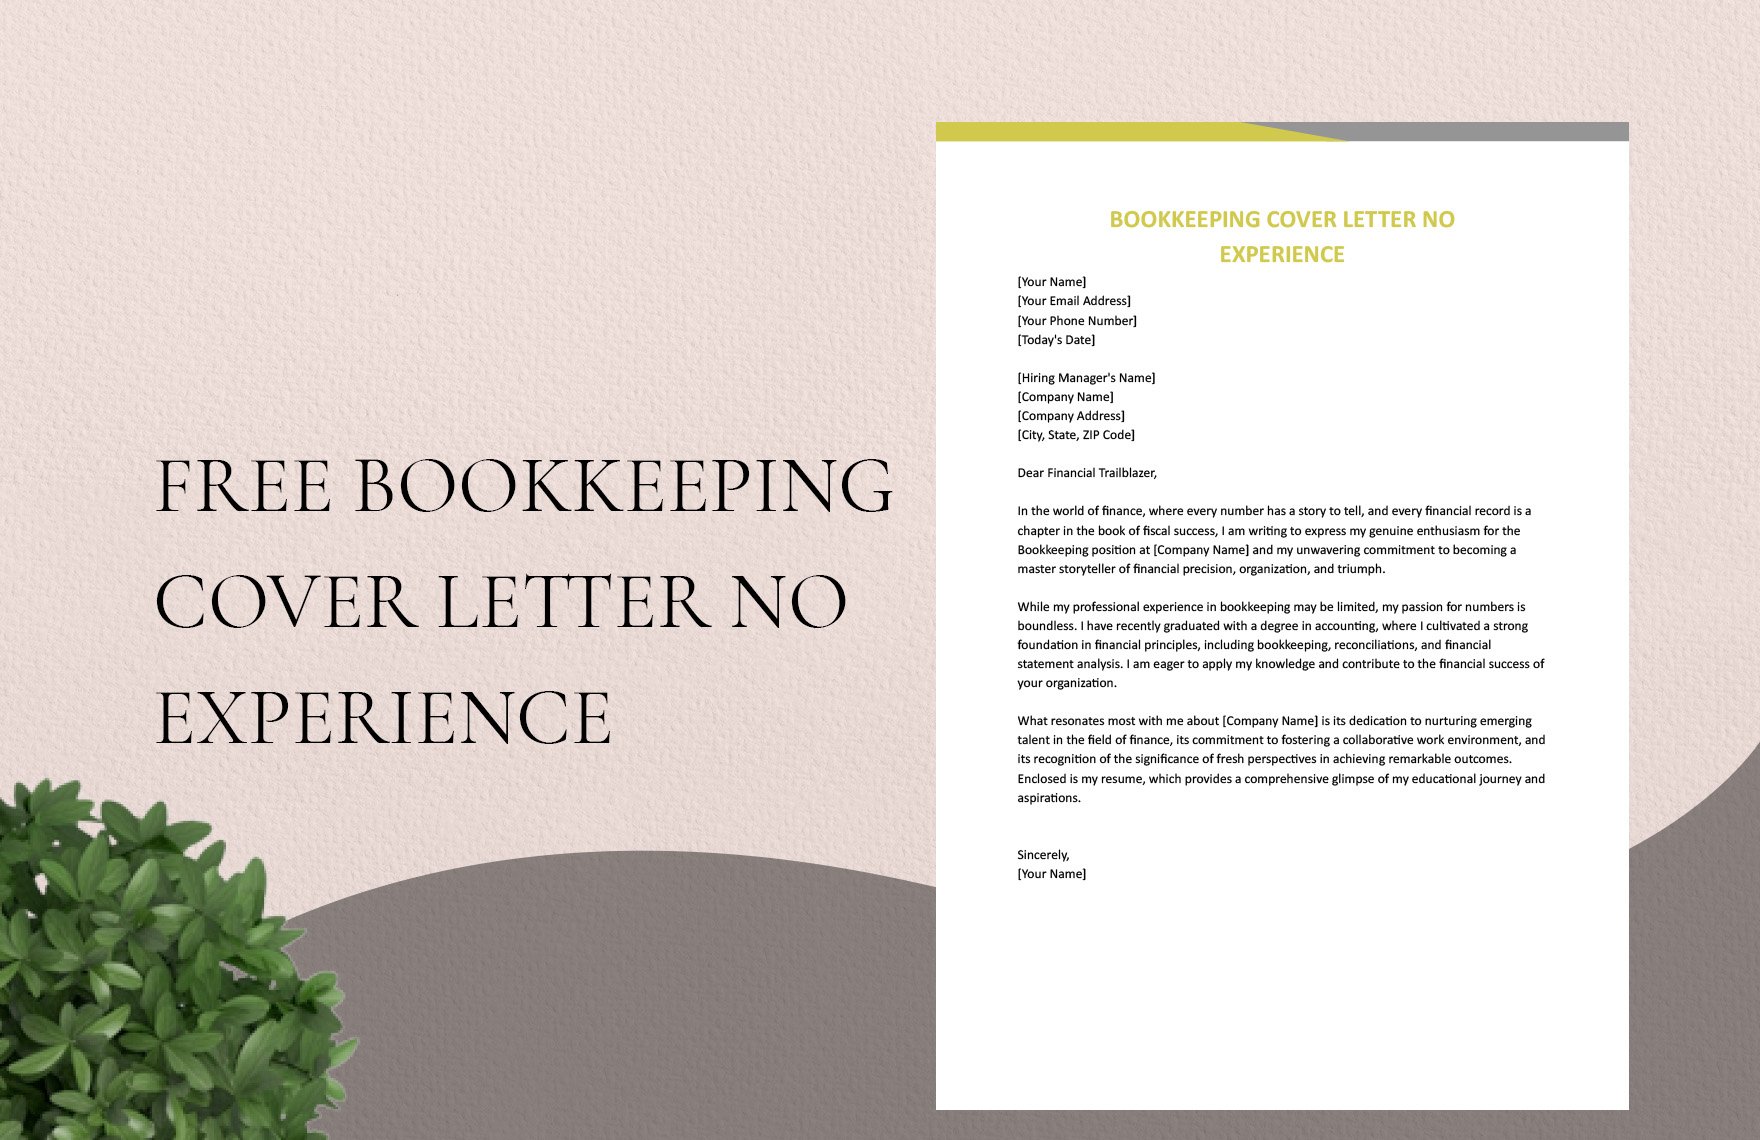 Bookkeeping Cover Letter No Experience